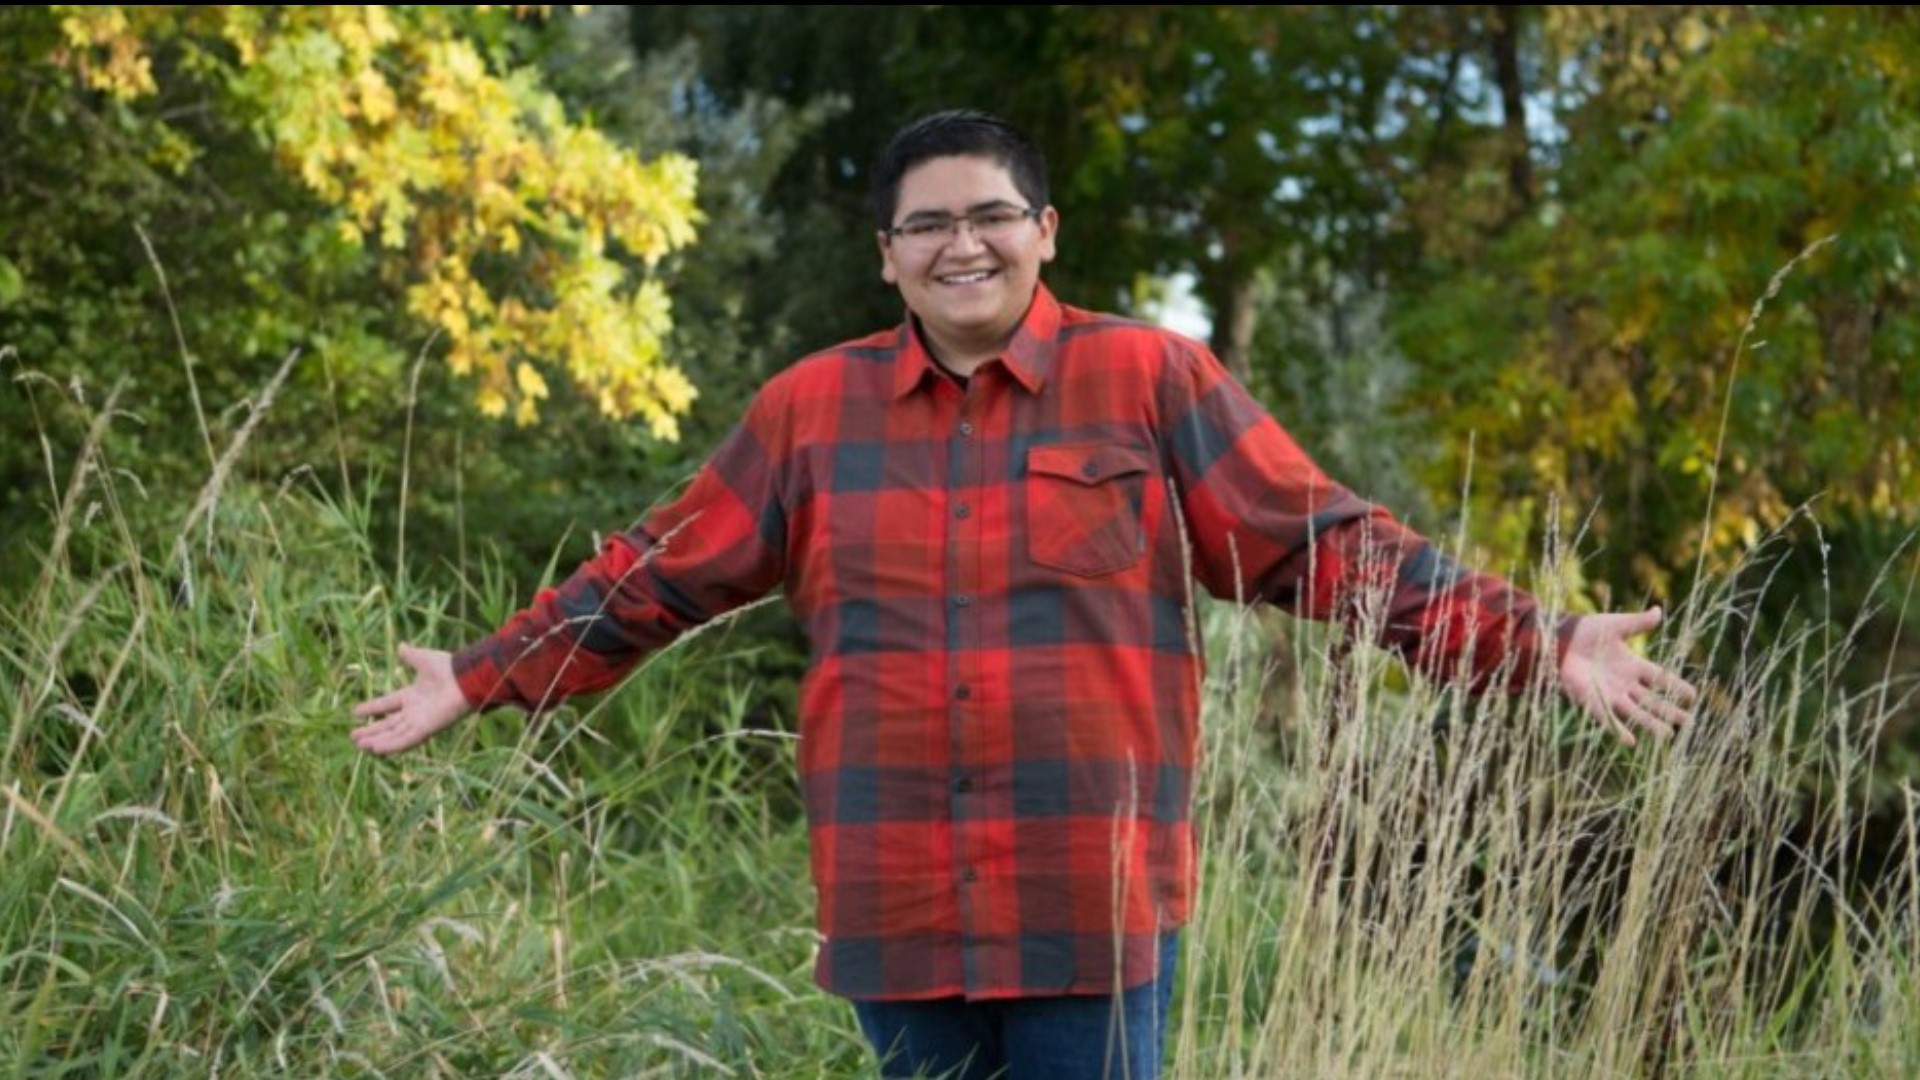 Kendrick Castillo’s parents described their son as a selfless individual who cared deeply about people.